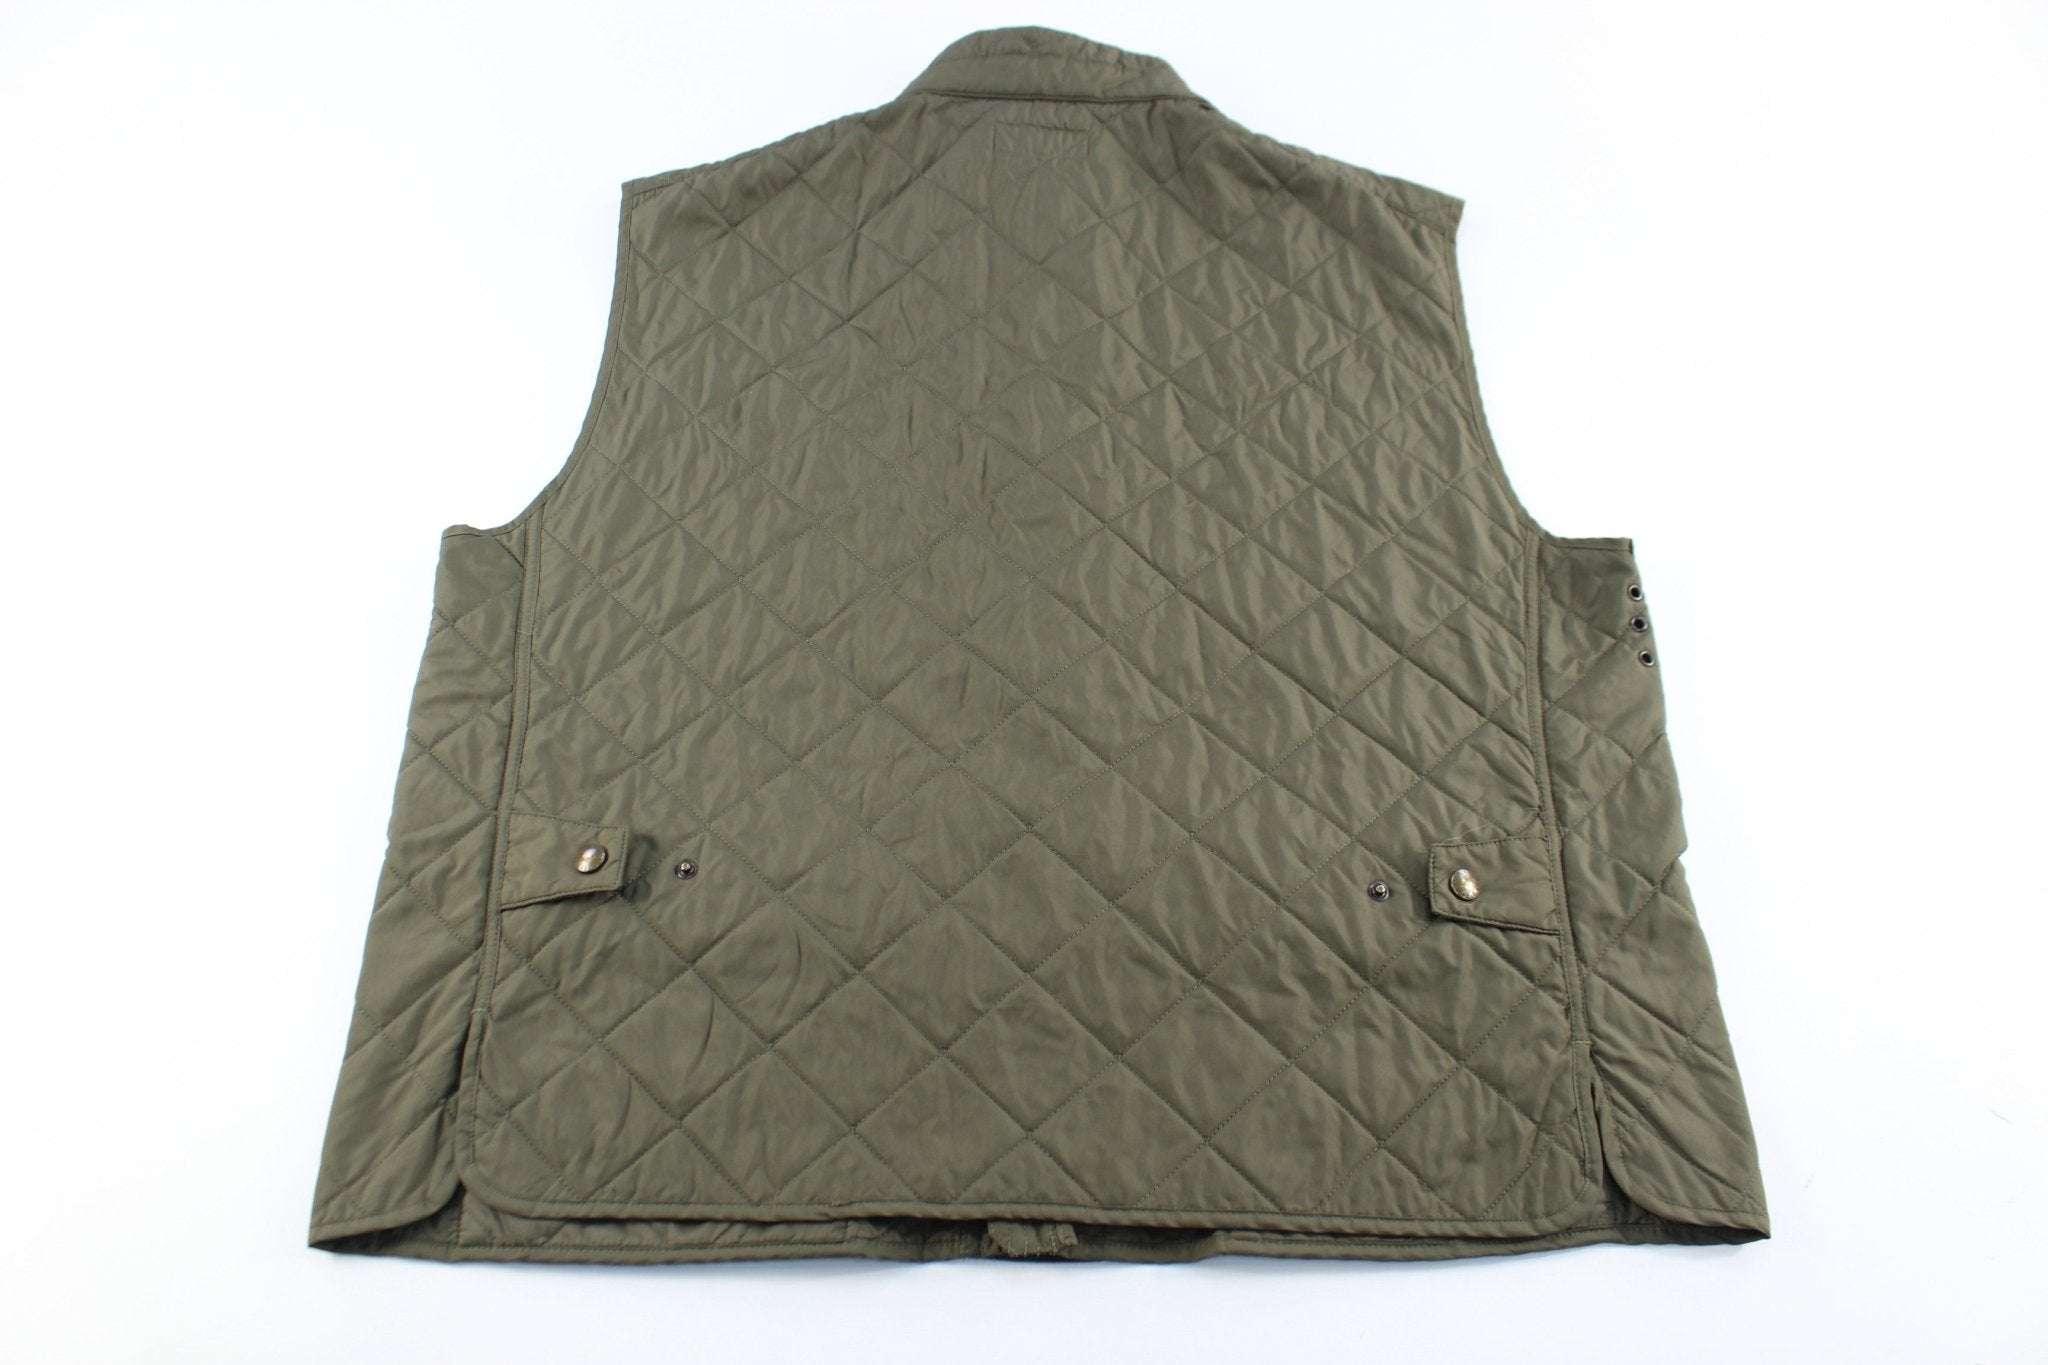 Polo by Ralph Lauren Olive Green Quilted Vest - ThriftedThreads.com